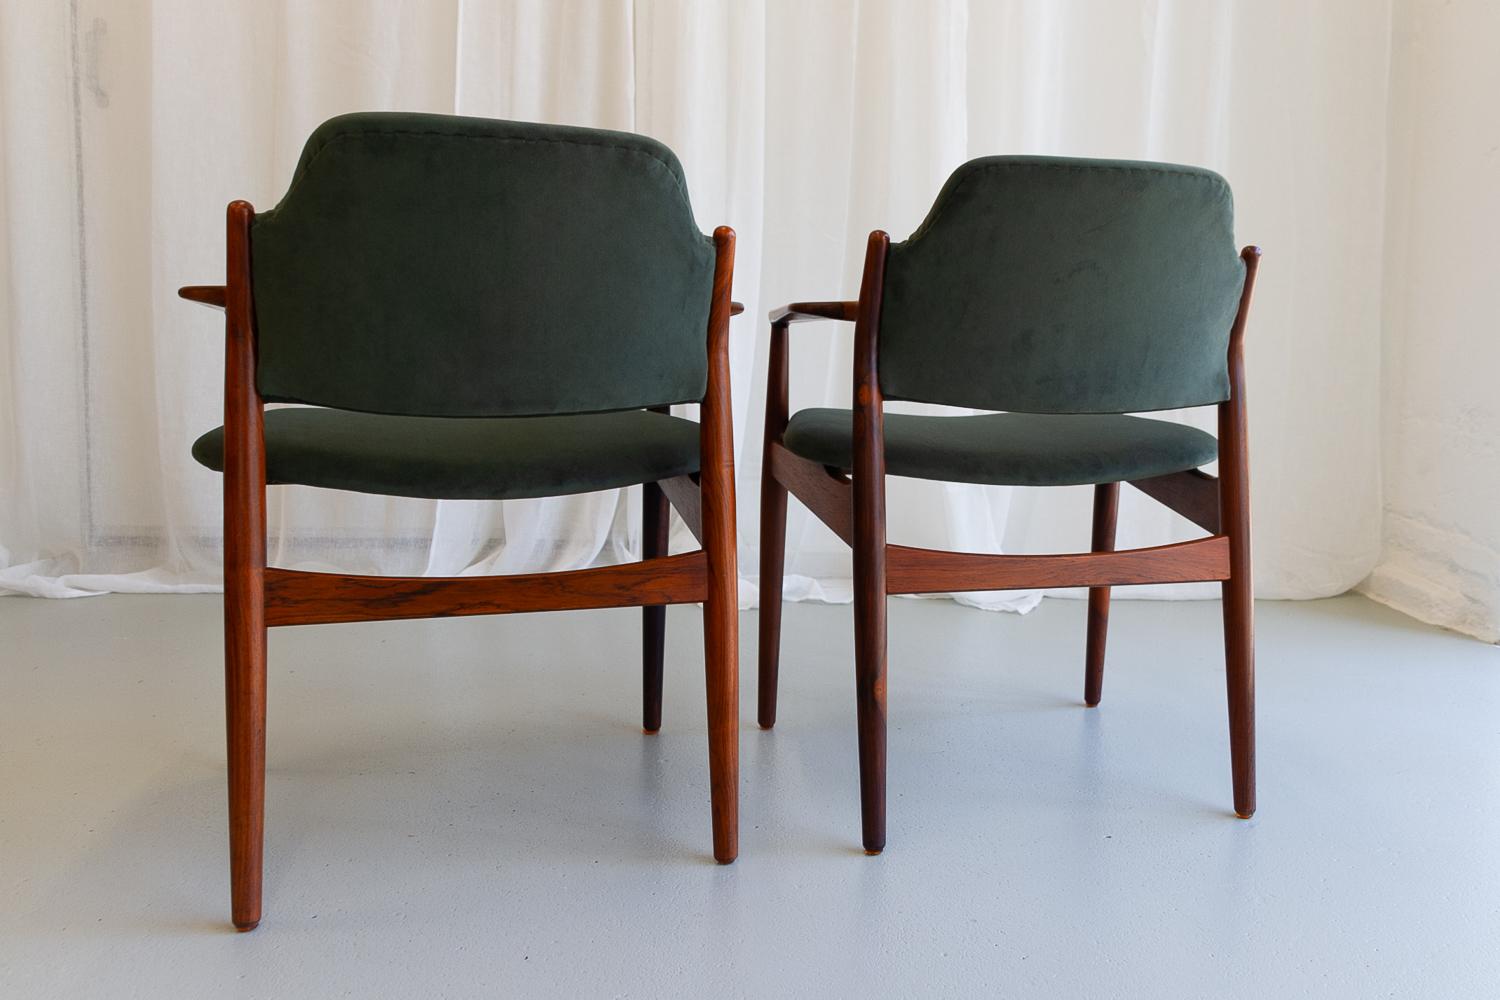 Danish Modern Rosewood Armchairs Model 62A by Arne Vodder, 1960s. Set of 2. For Sale 7